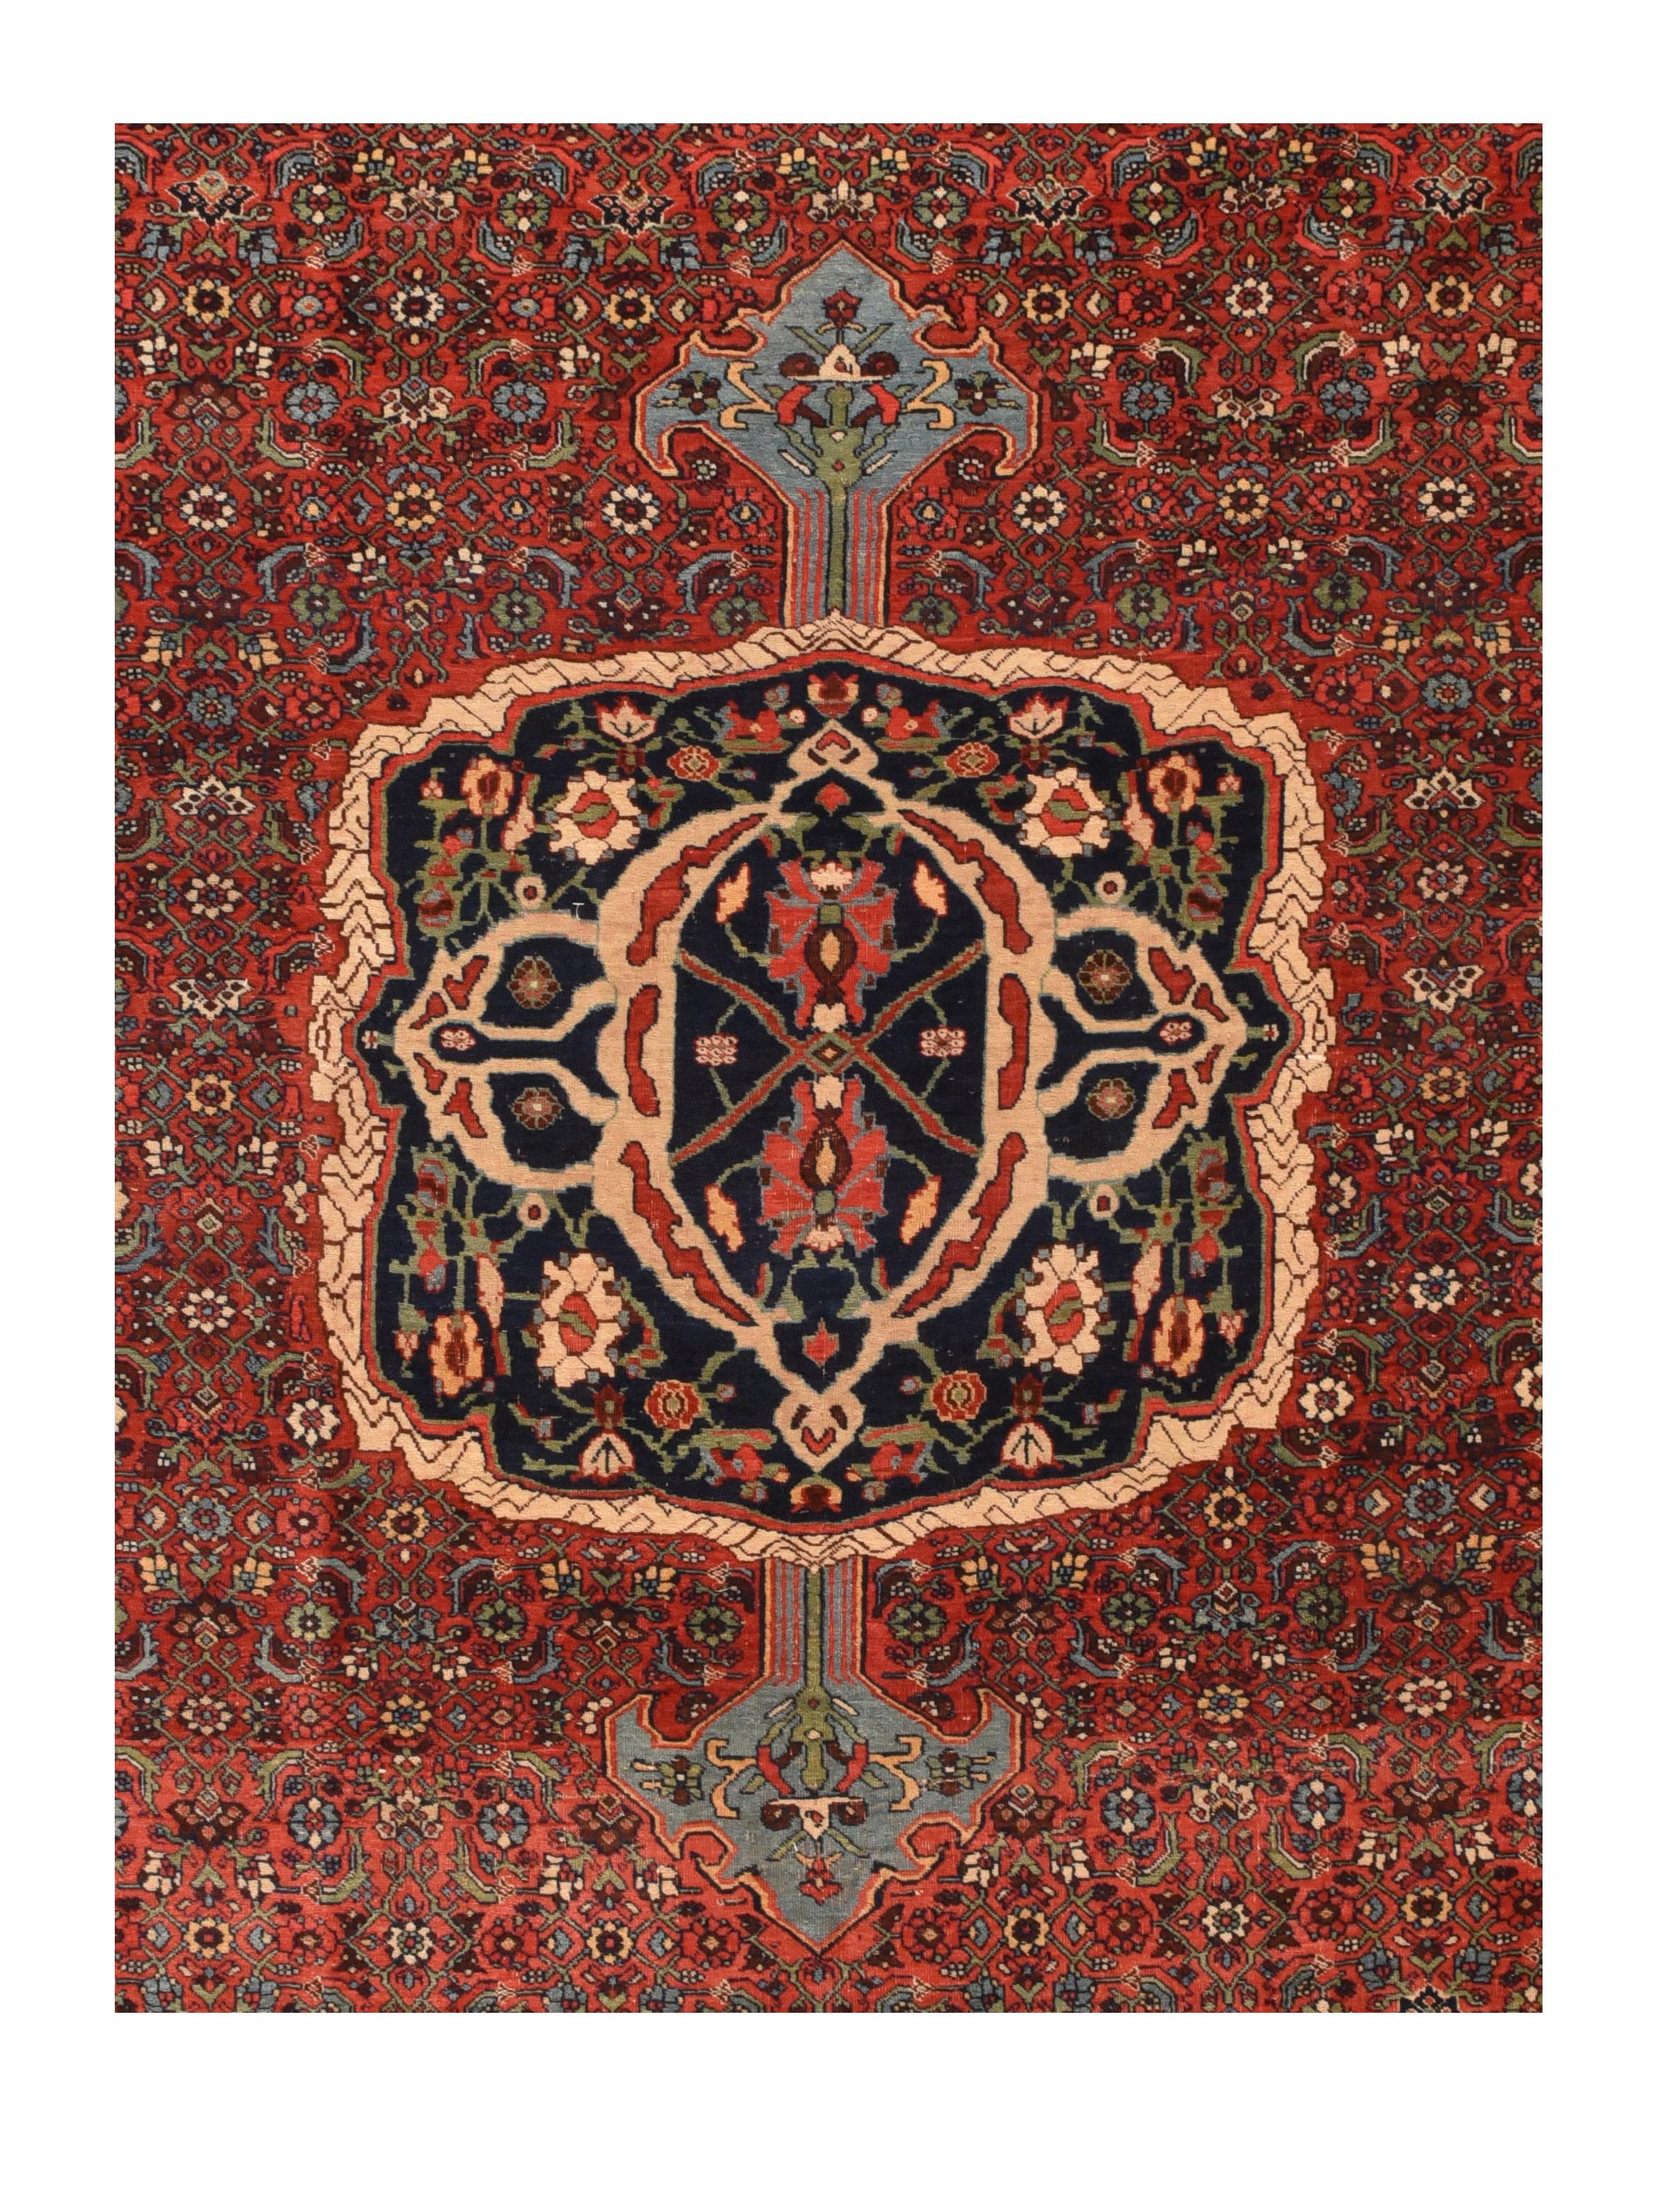 Antique Burgundy Bidjar Rug In Excellent Condition For Sale In New York, NY